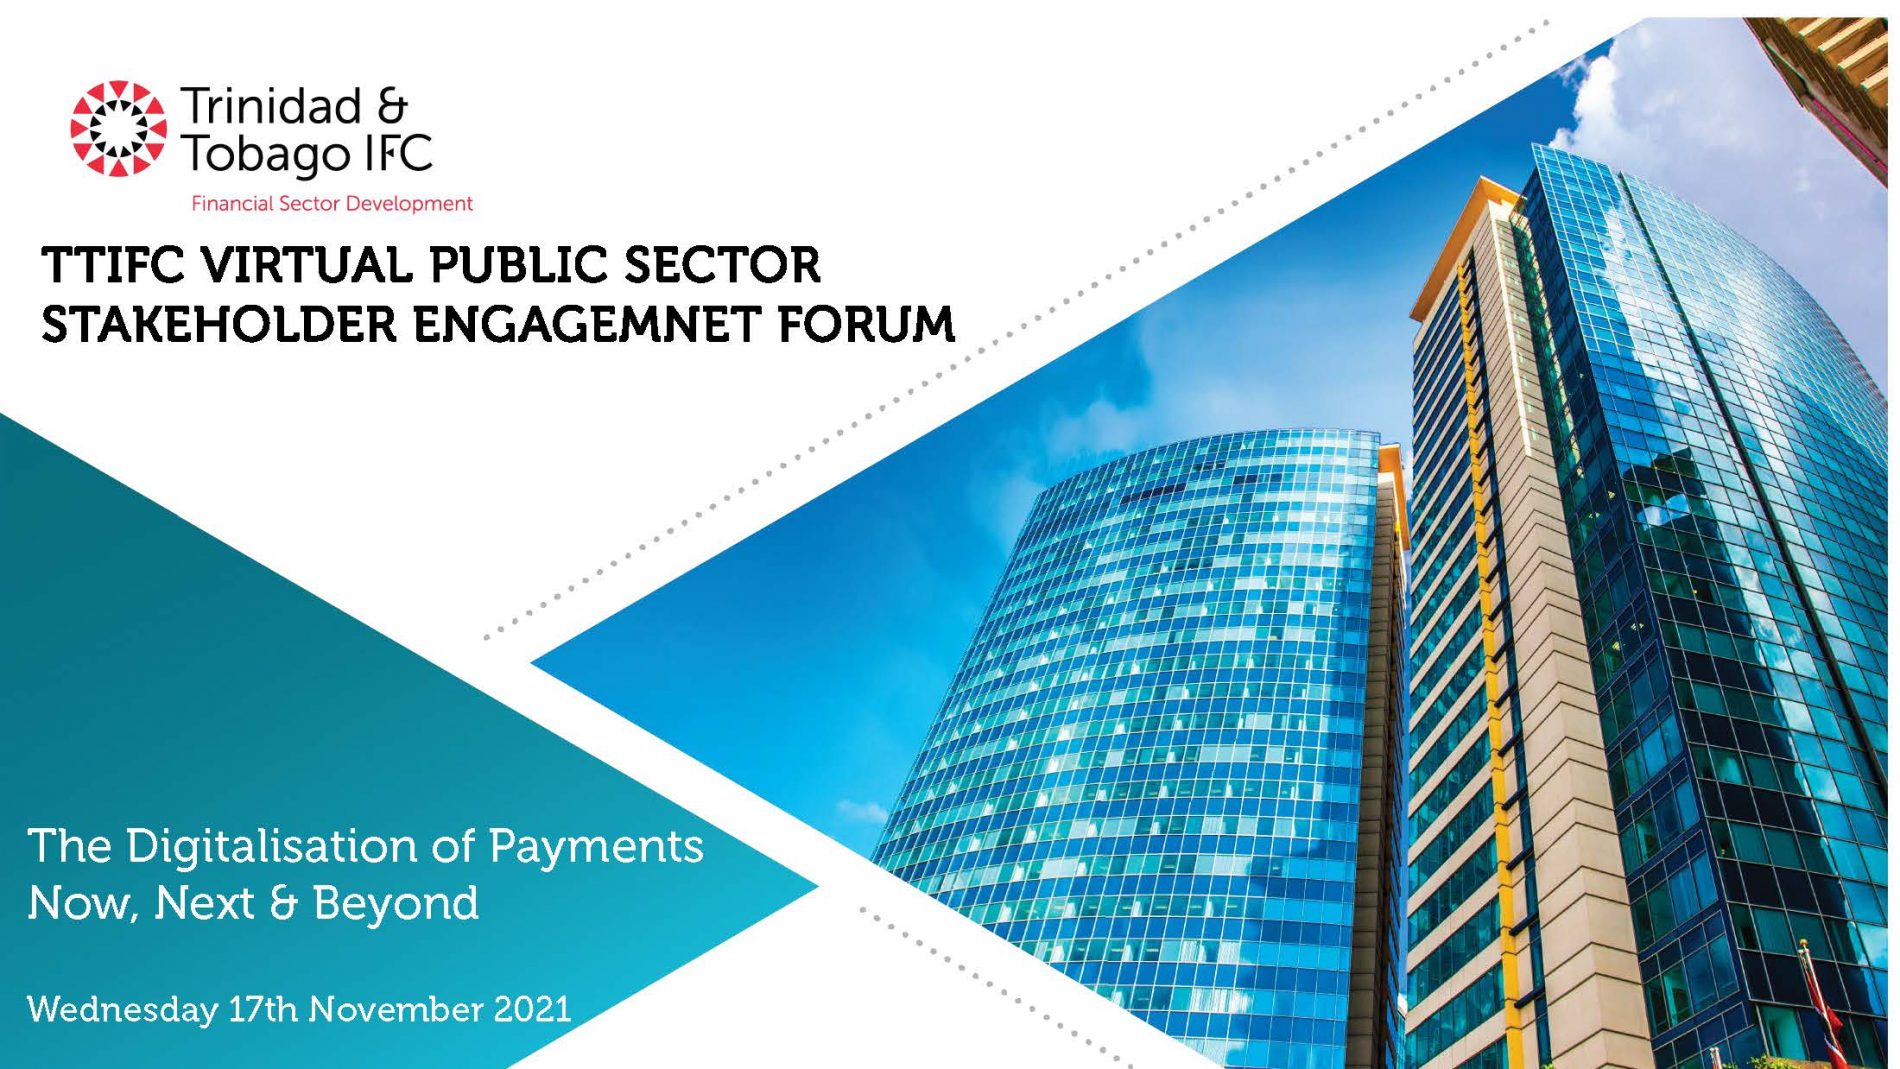 Public Sector Stakeholder Engagement Session- Presentation by TTIFC Wednesday 17th November 2021